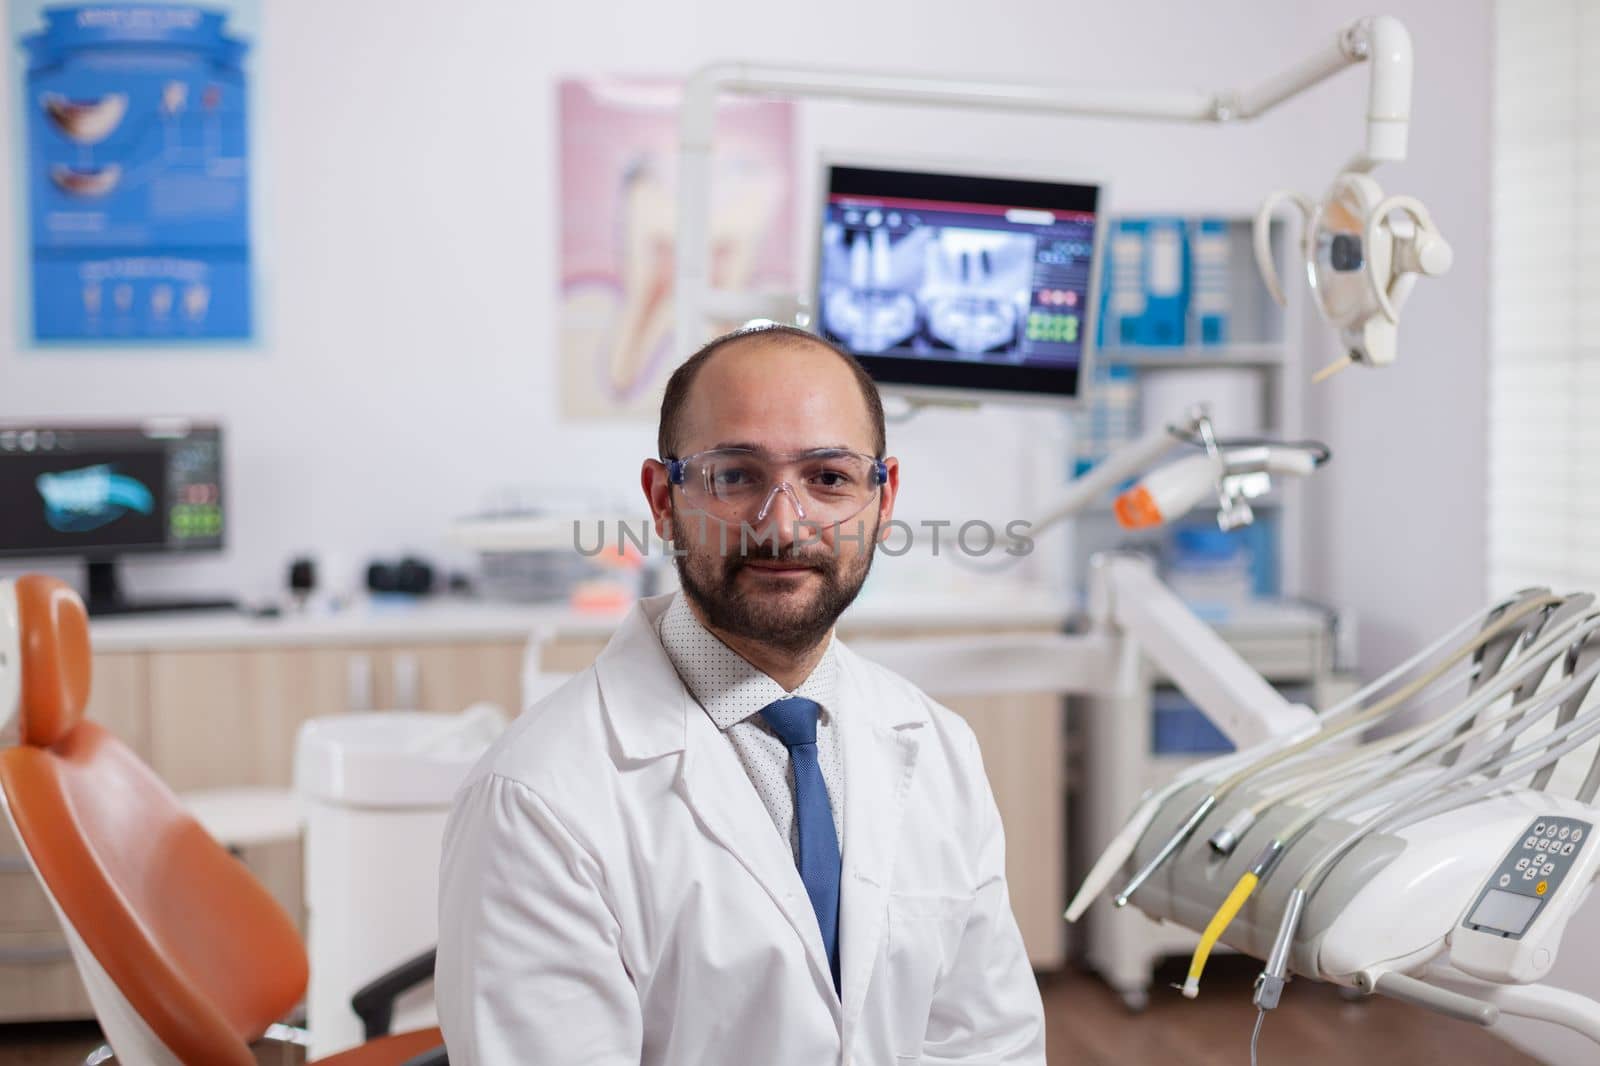 Confident dentist in stomatology cabinet with orange equiptment wearing dental uniform. Medical specialist in oral hygiene wearing lab coat looking at camera in dentistry office.